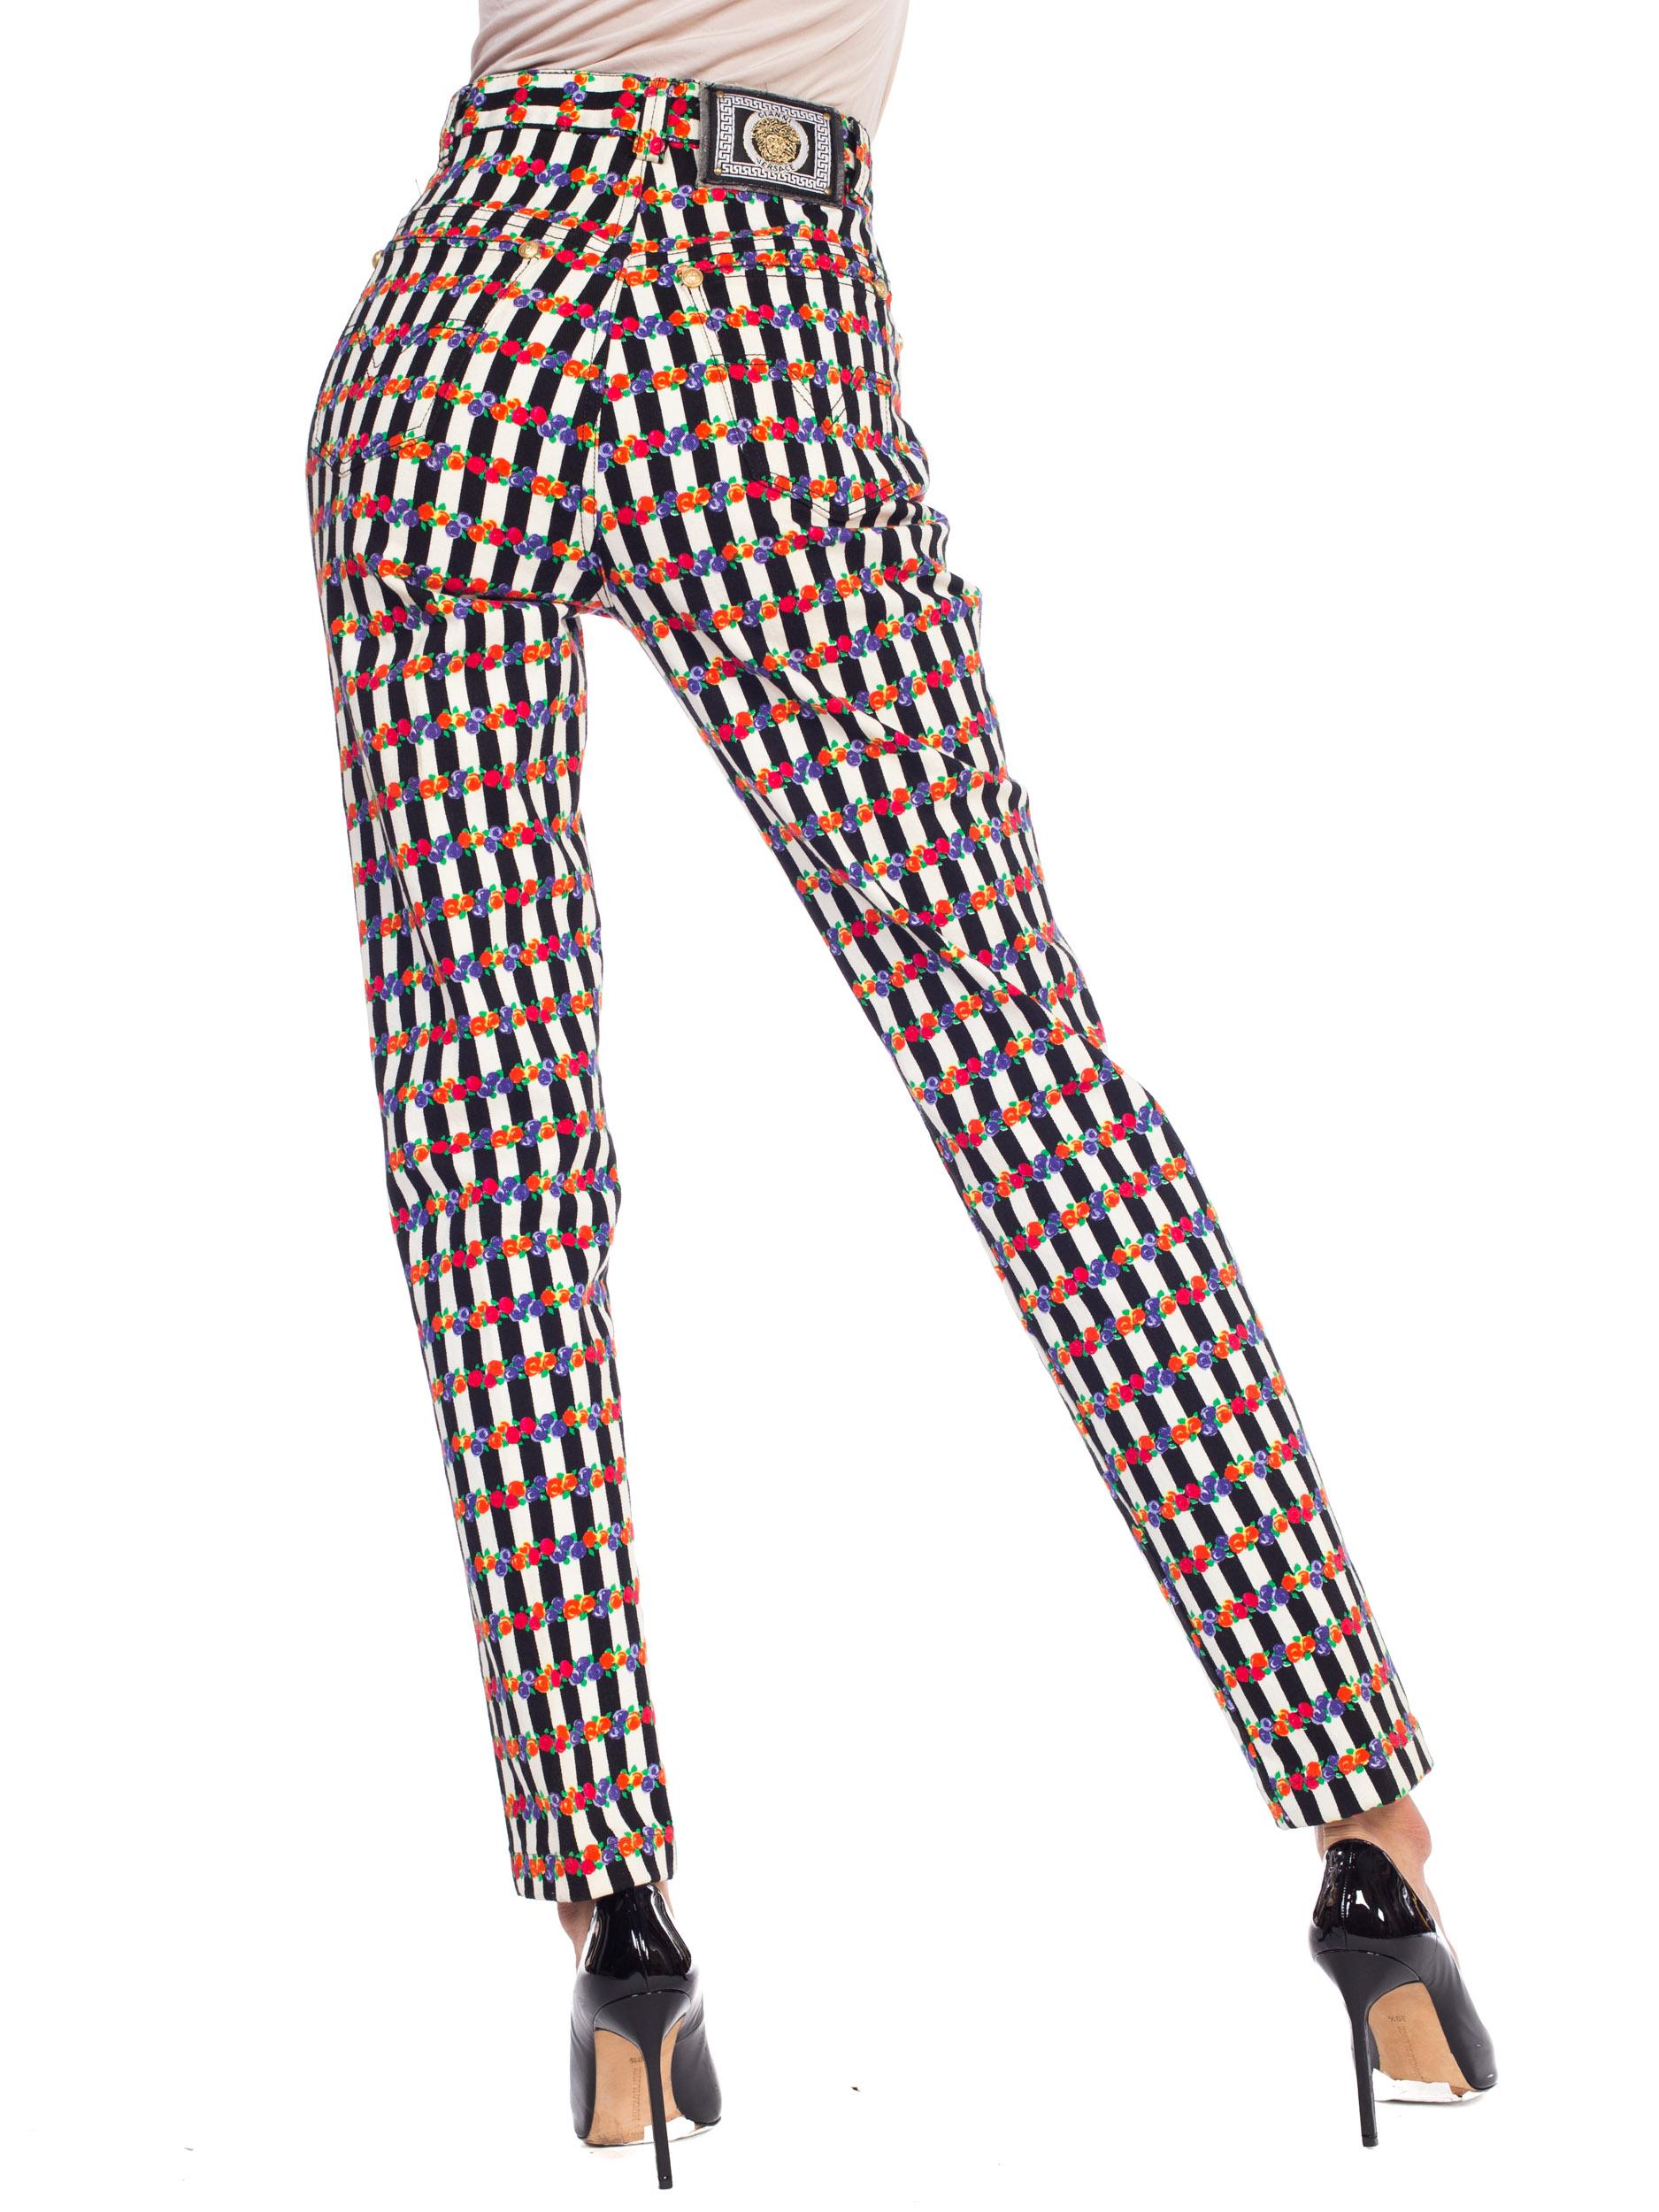 1990S GIANNI VERSACE  Floral Striped Jeans Pants 1